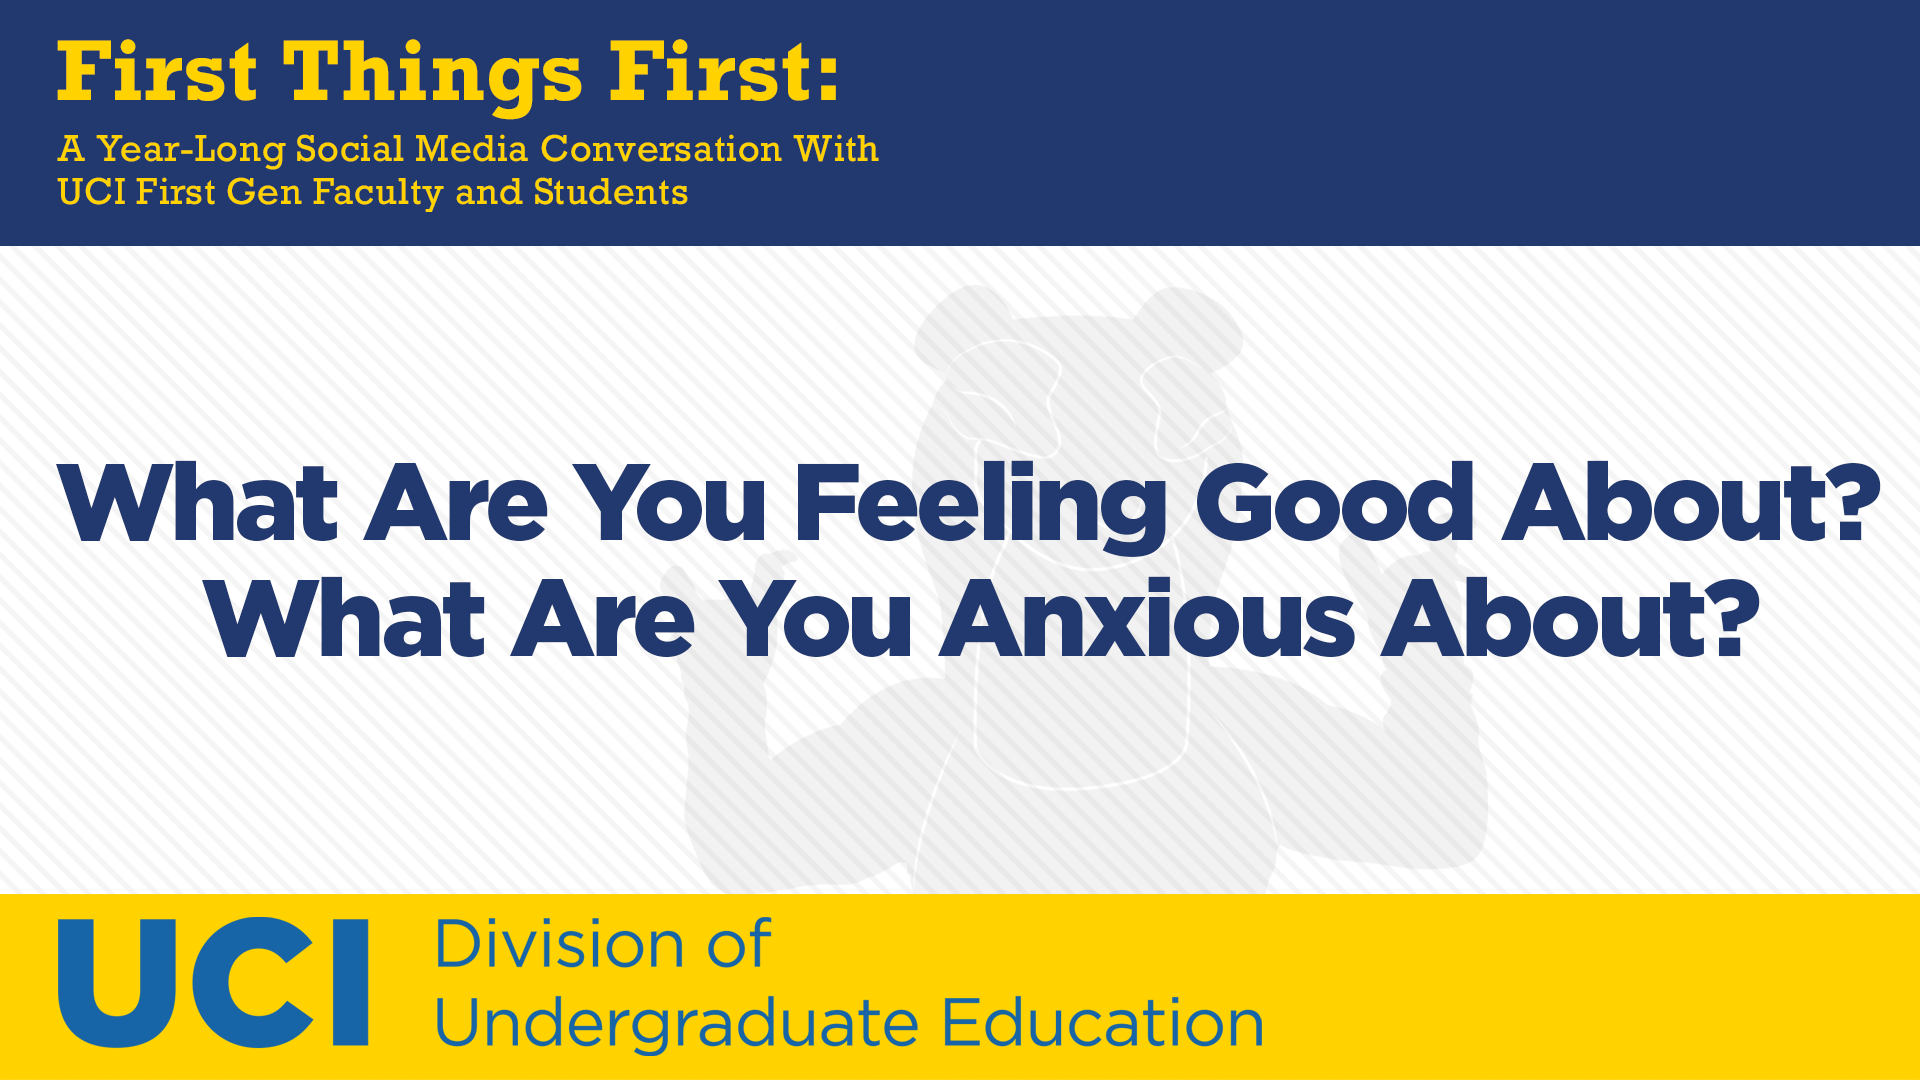 What Are You Feeling Good About So Far This Quarter? What Are You Feeling Anxious About?